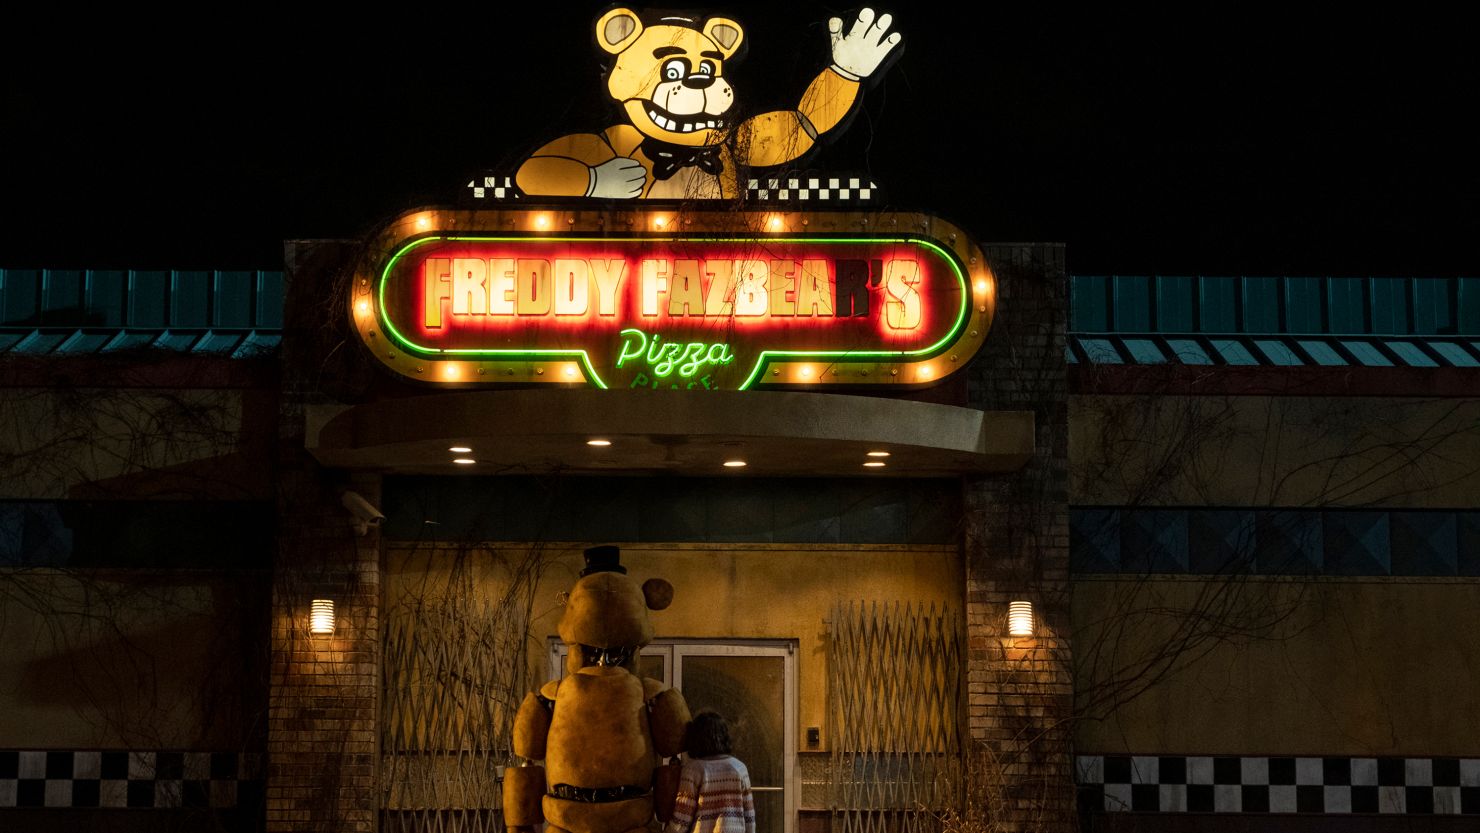 FIVE NIGHTS AT FREDDY'S, from Universal Pictures and Blumhouse in association with Striker Entertainment.